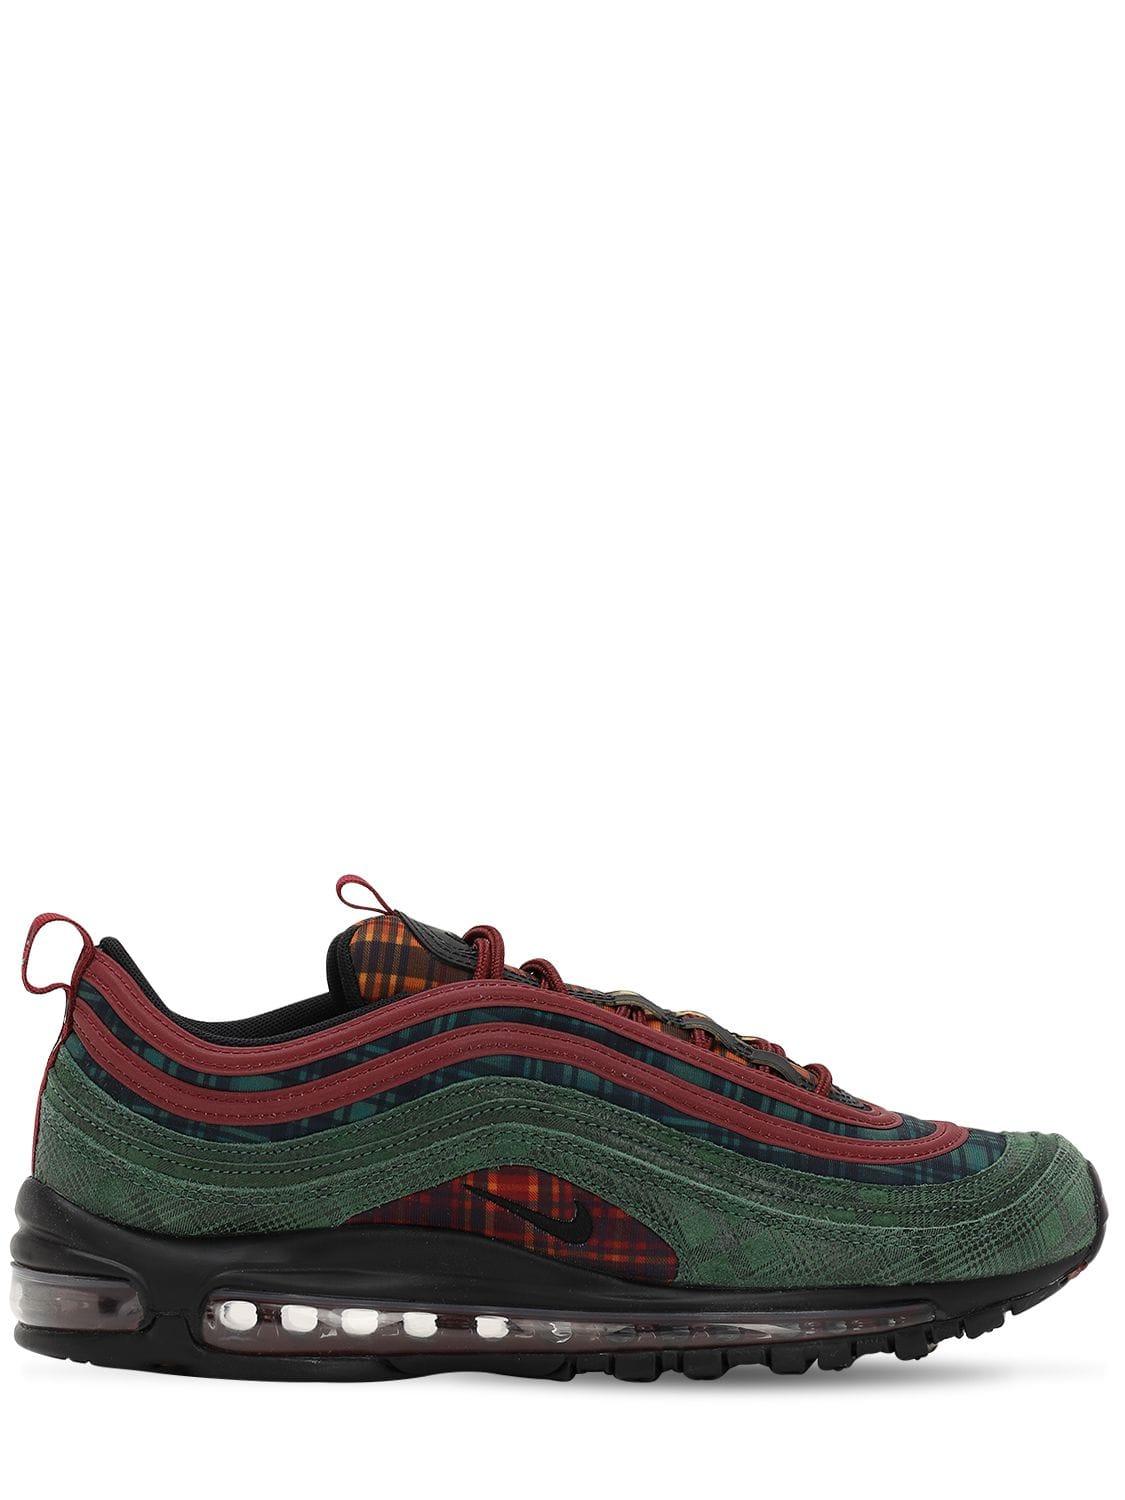 Nike Air Max 97 Nrg Jacket Pack Sneakers for Men - Lyst